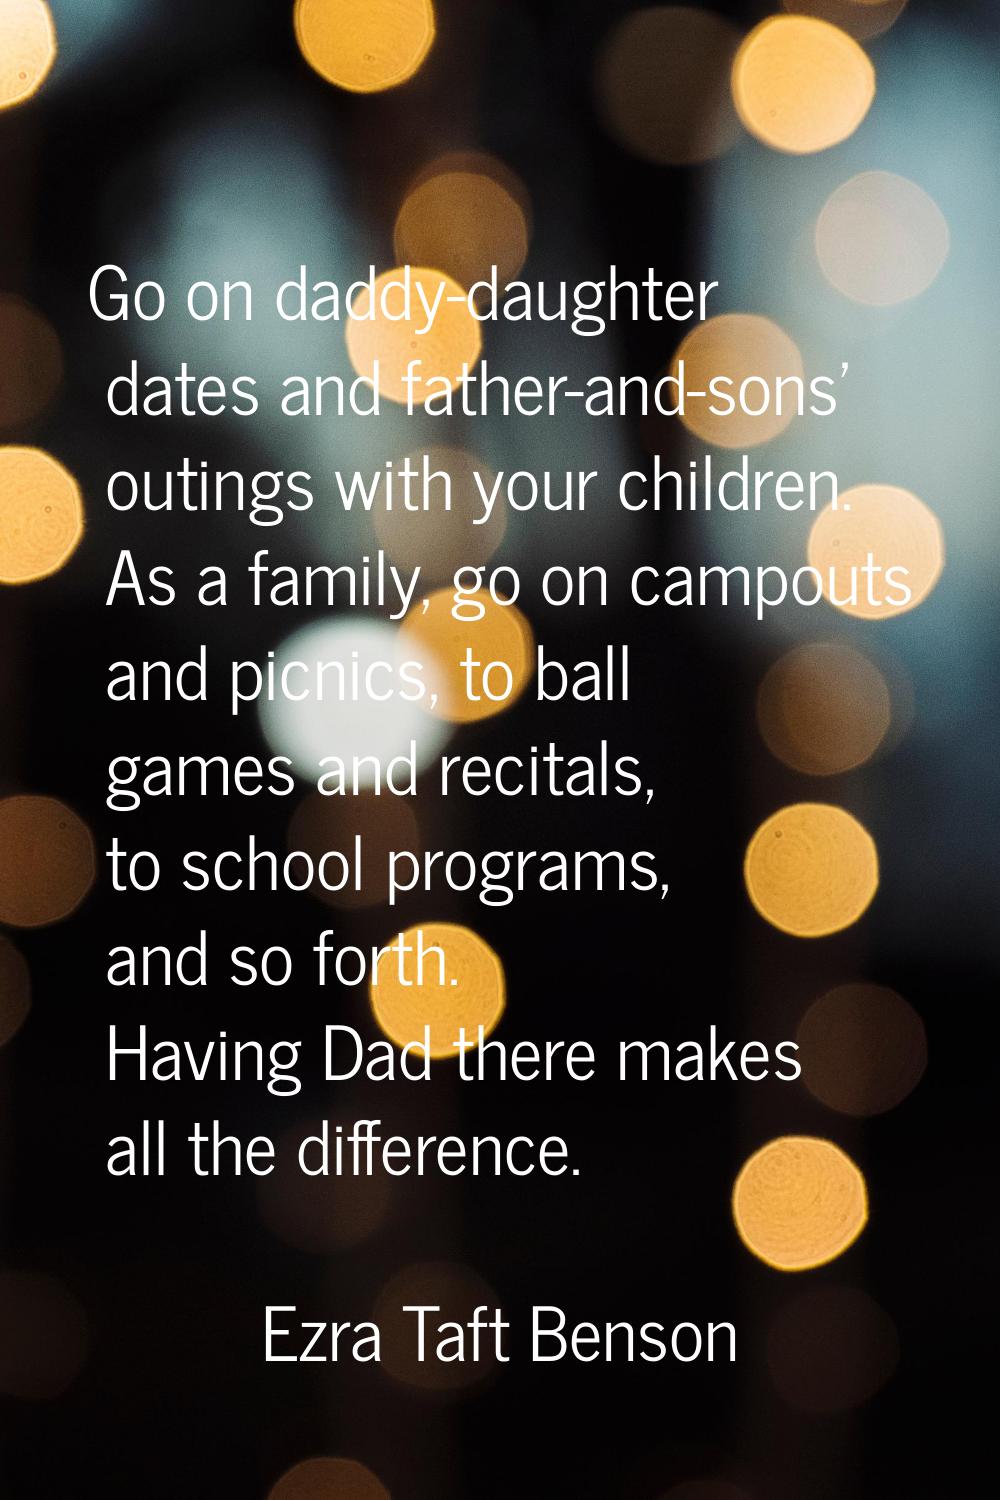 Go on daddy-daughter dates and father-and-sons' outings with your children. As a family, go on camp